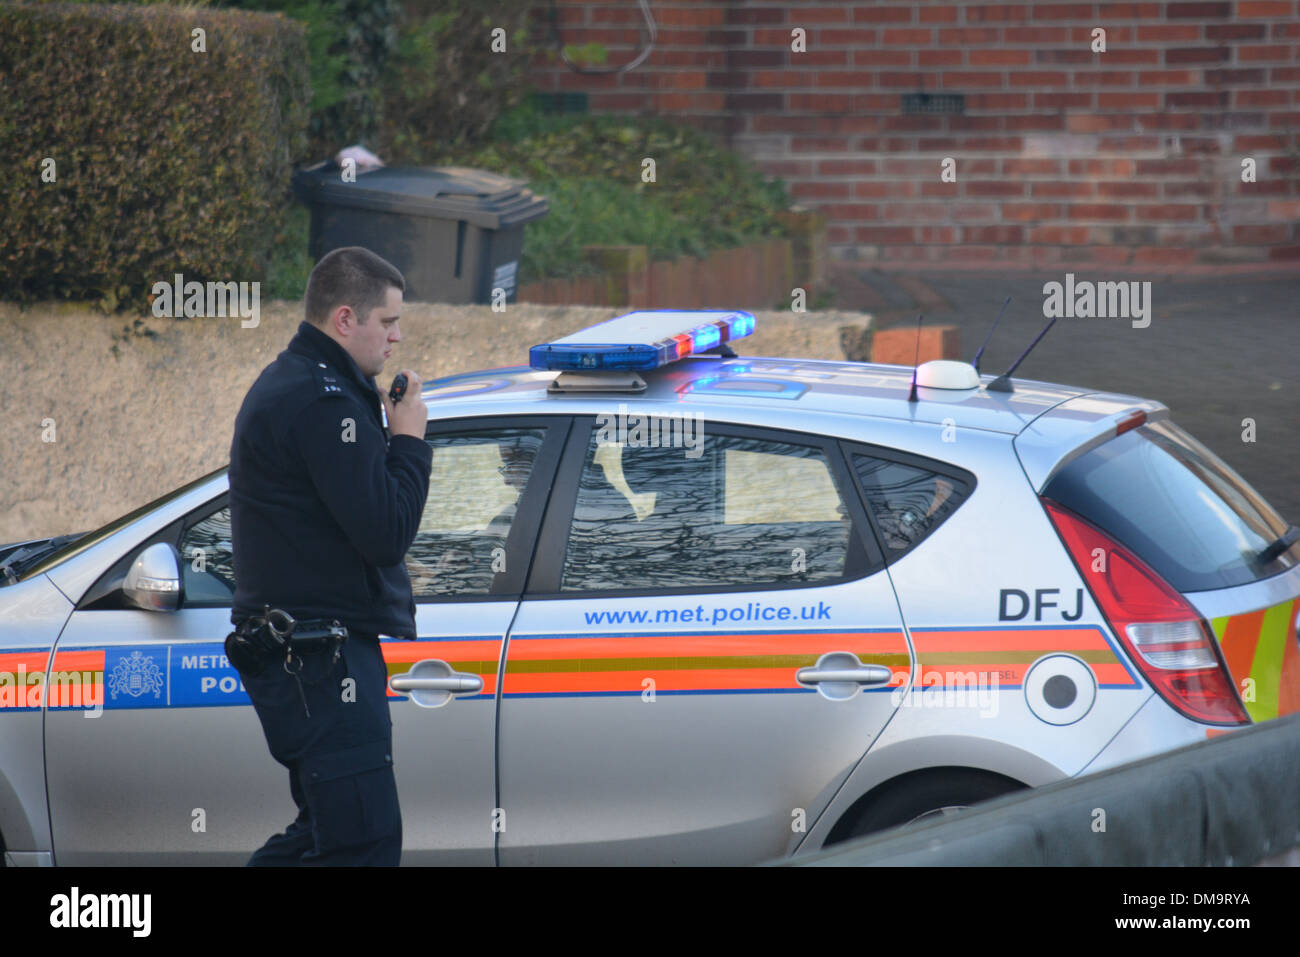 British police officer questioning suspect in vehicle and checking details. Stock Photo